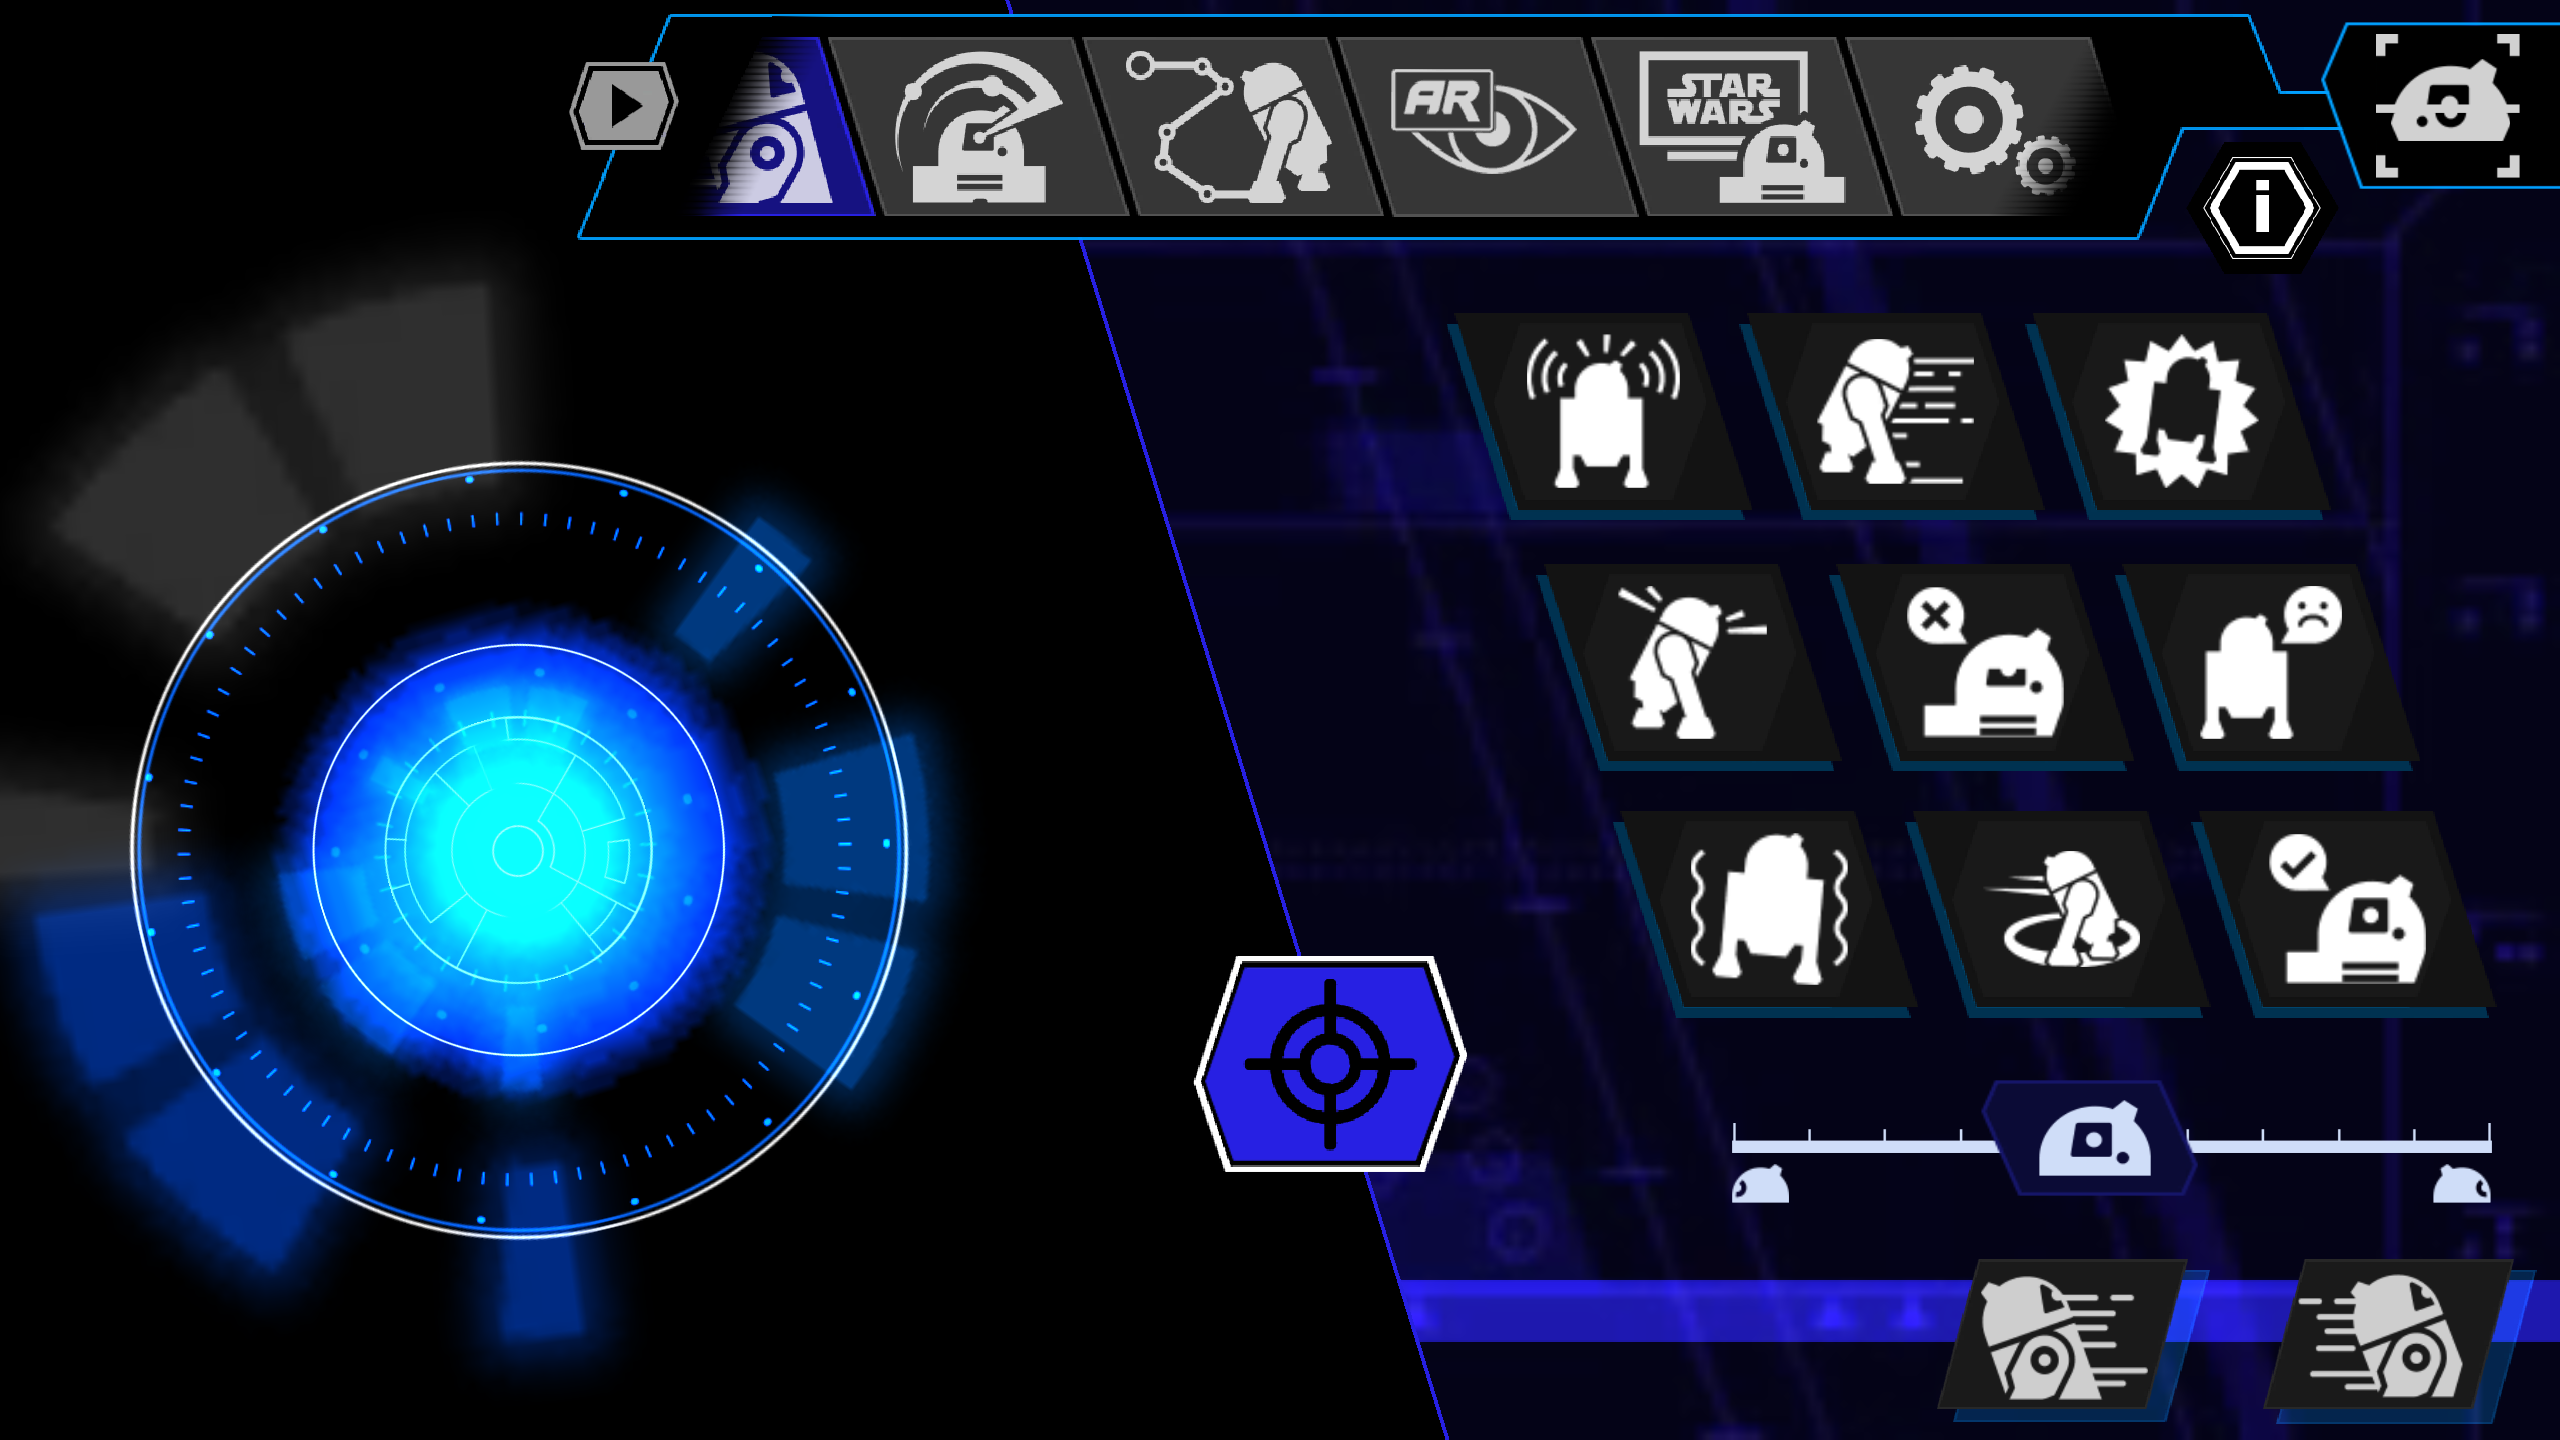 Sphero R2-D2 app interface with control options.